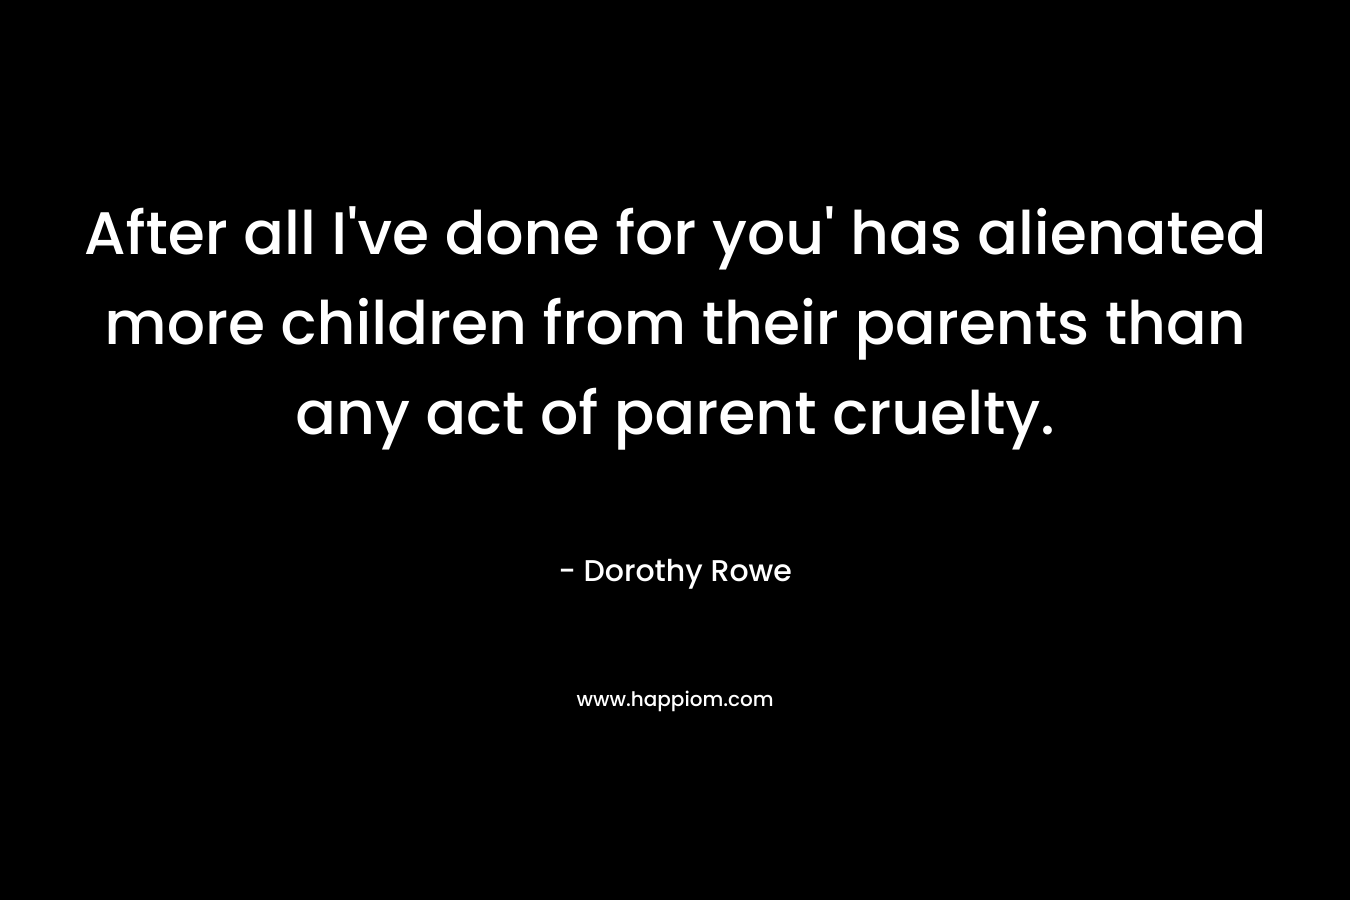 After all I’ve done for you’ has alienated more children from their parents than any act of parent cruelty. – Dorothy Rowe